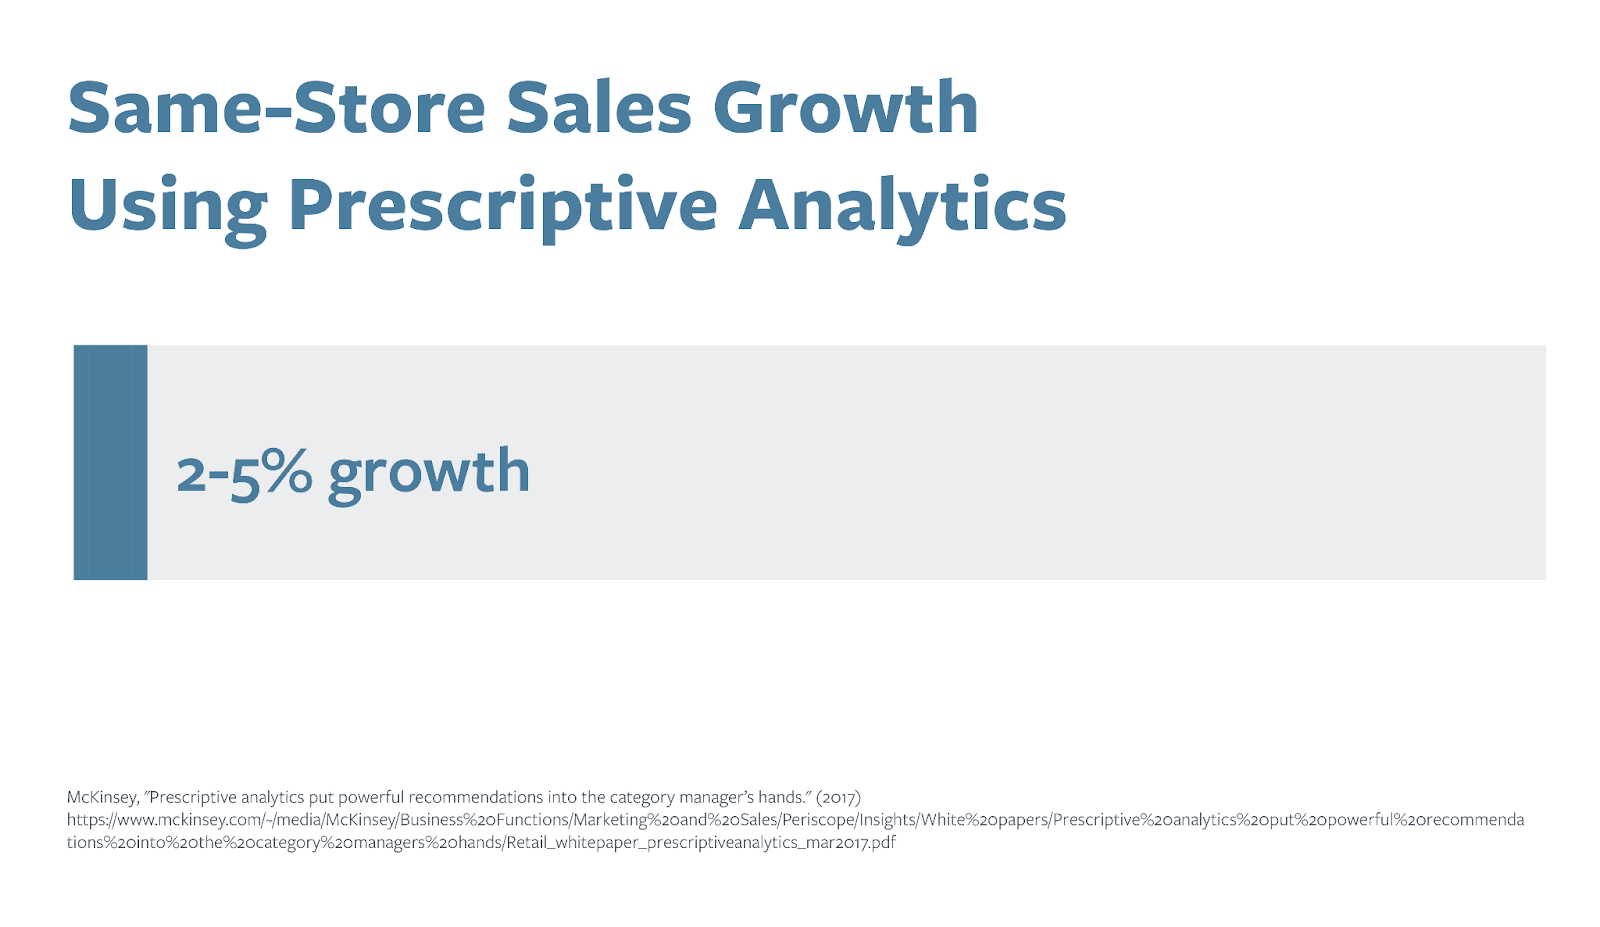 Graphic showing same-store sales growth using prescriptive analysis.